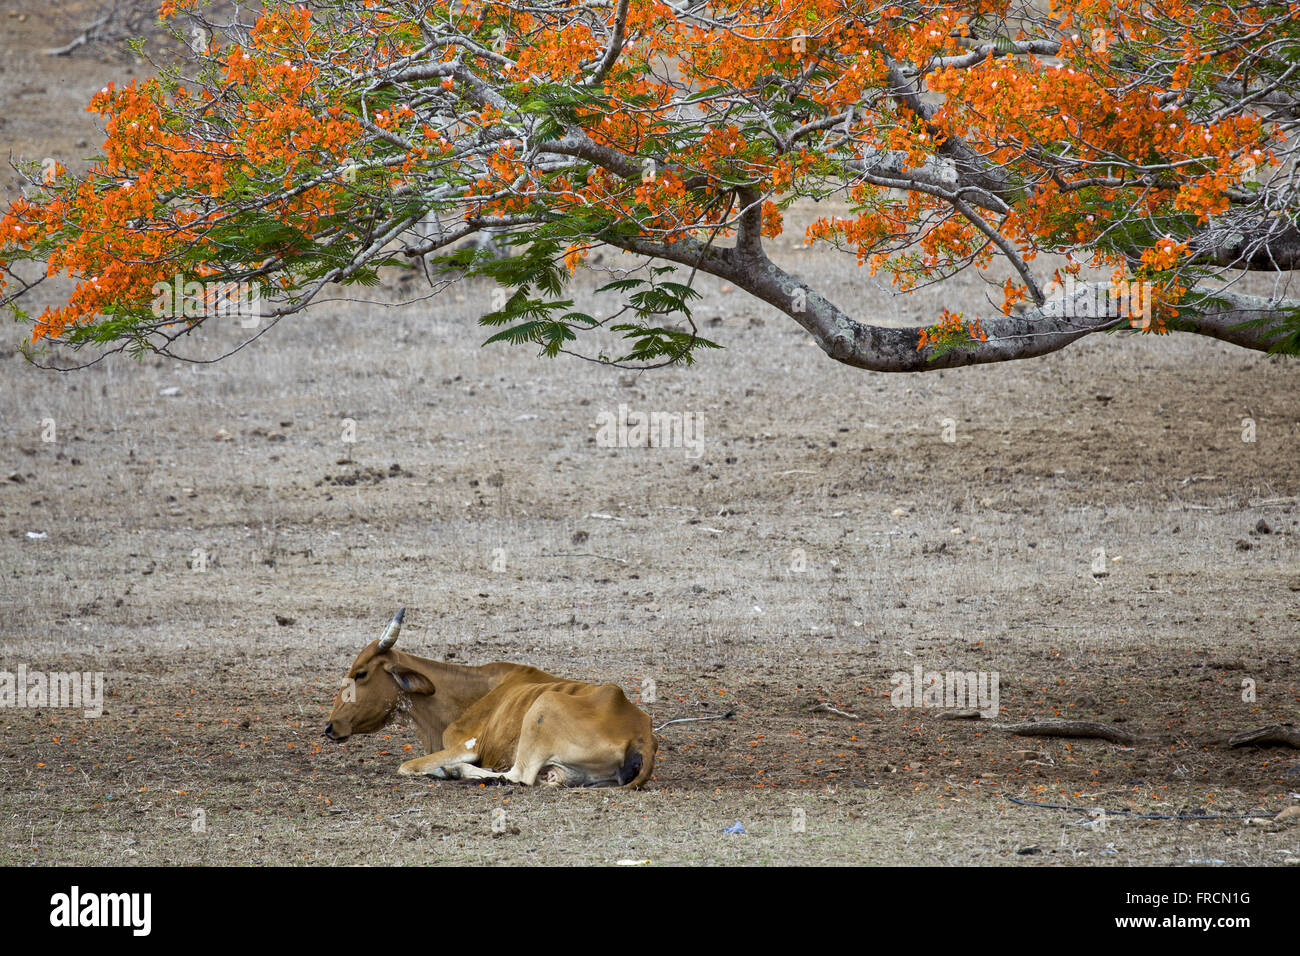 Ox lying in the shade of tree florida - region of the rough Stock Photo